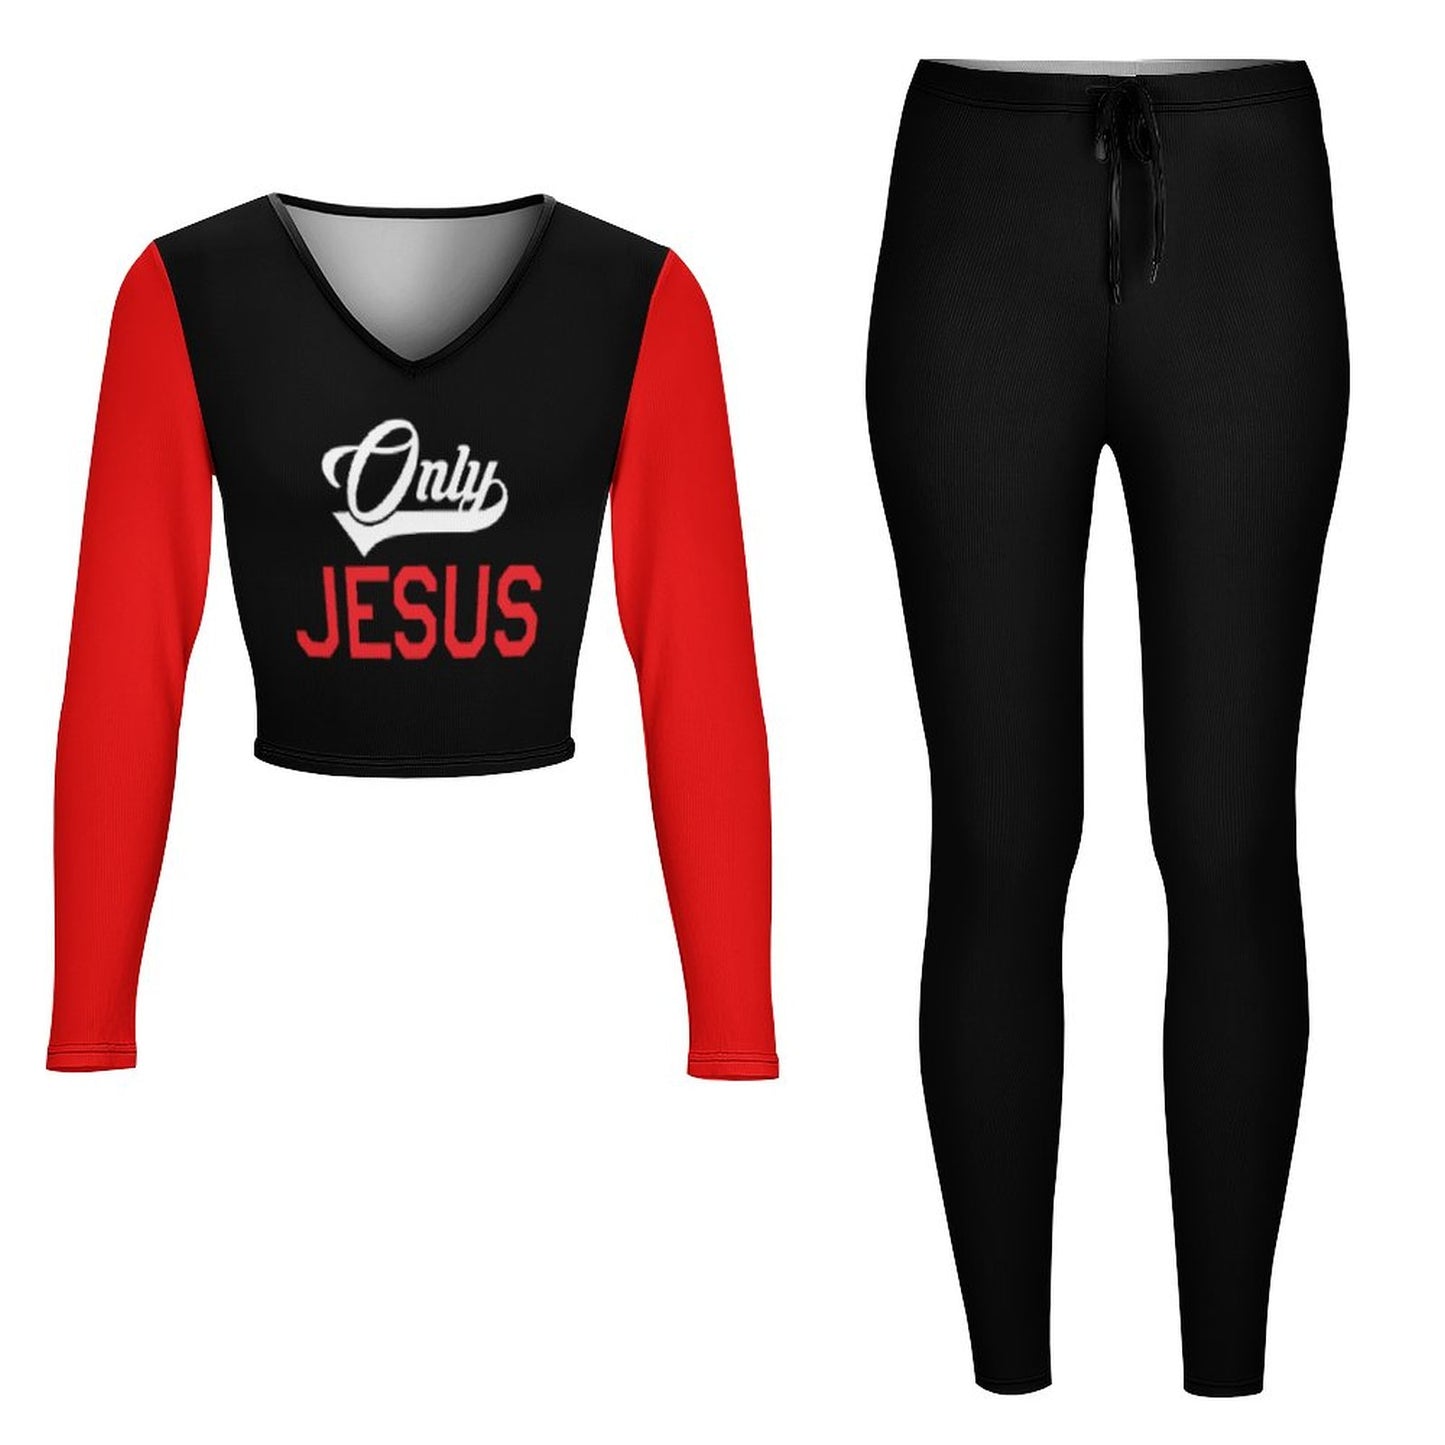 Only Jesus Women's Christian Casual Outfit V neck Sweatshirt Set  SALE-Personal Design